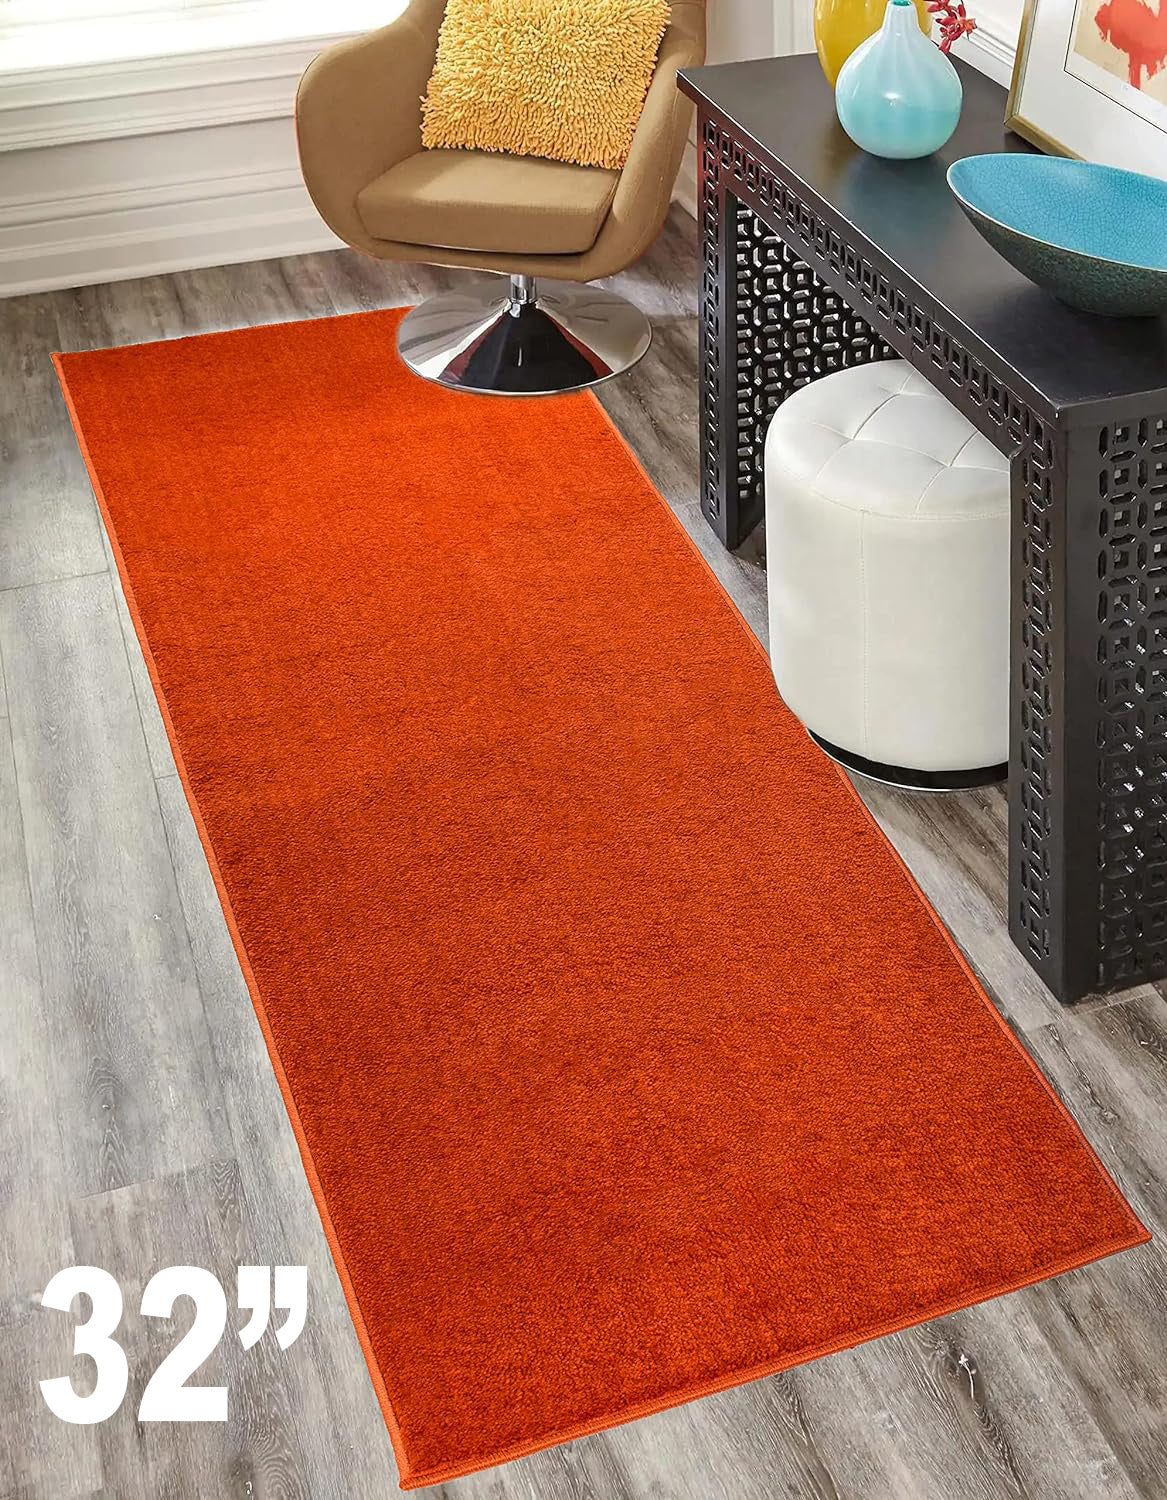 Machine Washable Custom Size Runner Rug Solid Orange Color Skid Resistant Rug Runner Customize Up to 50 Feet and 30 Inch Width Runner Rug